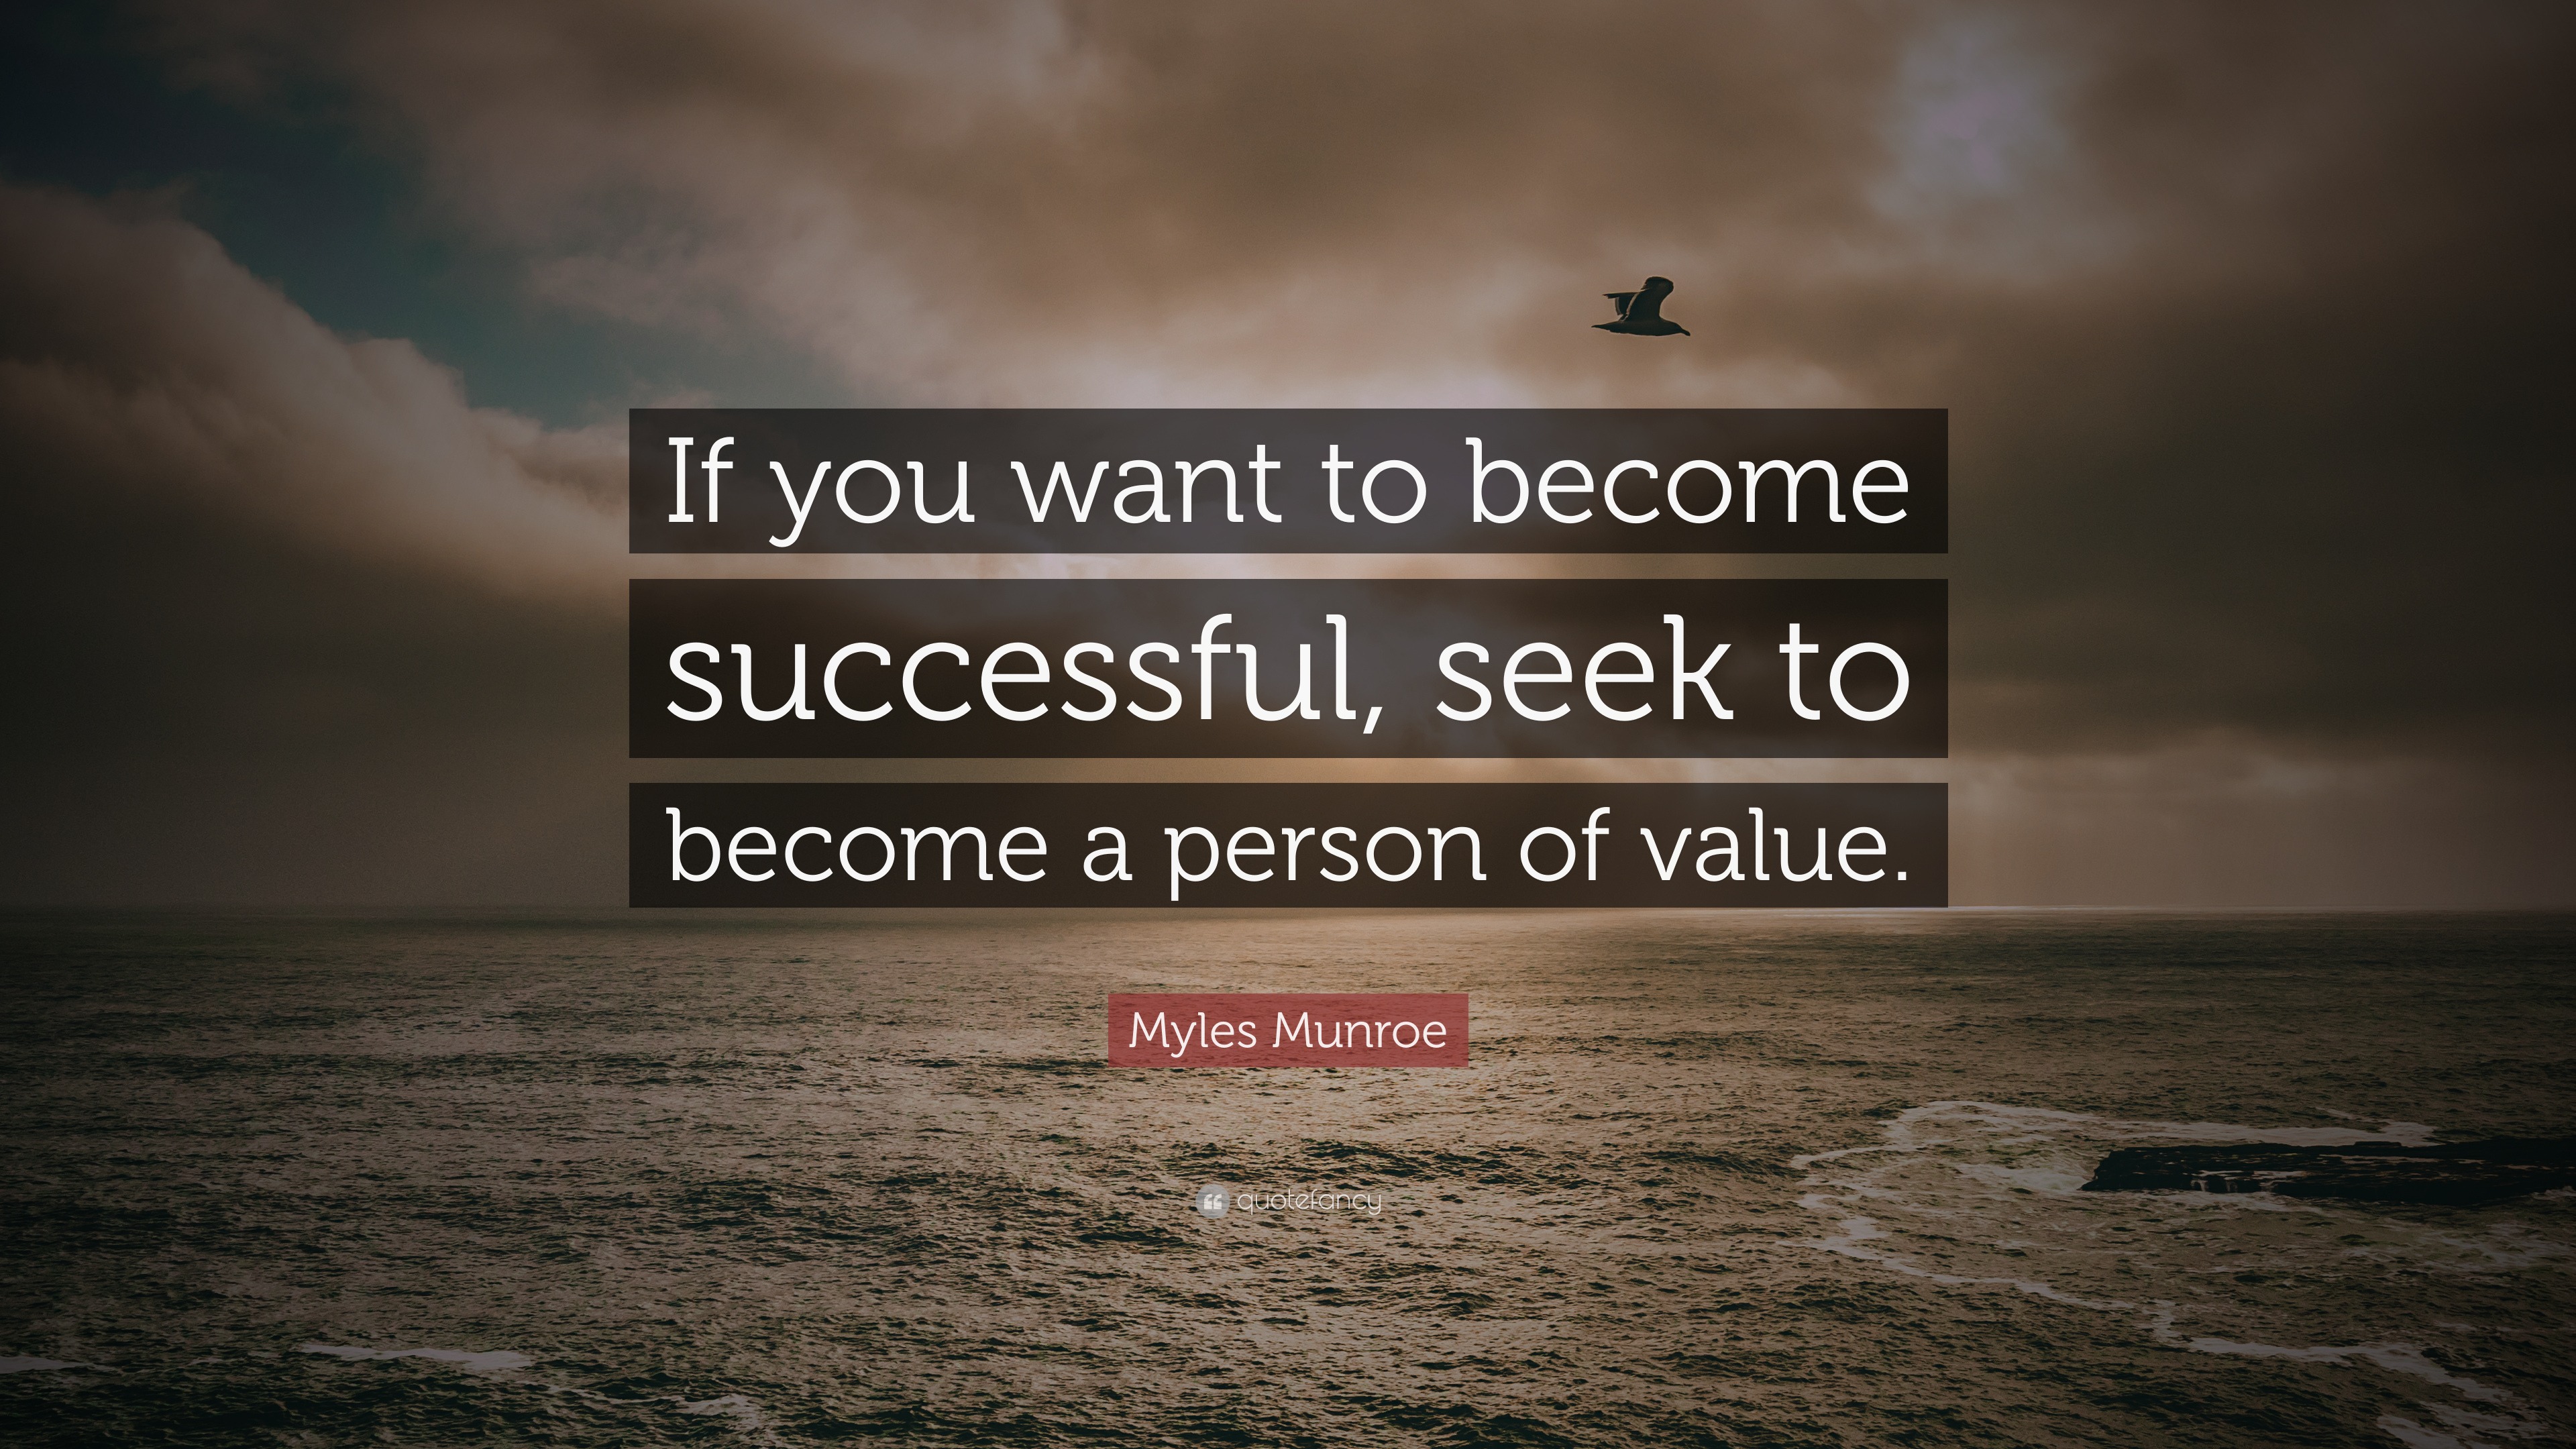 4698321 Myles Munroe Quote If you want to become successful seek to become